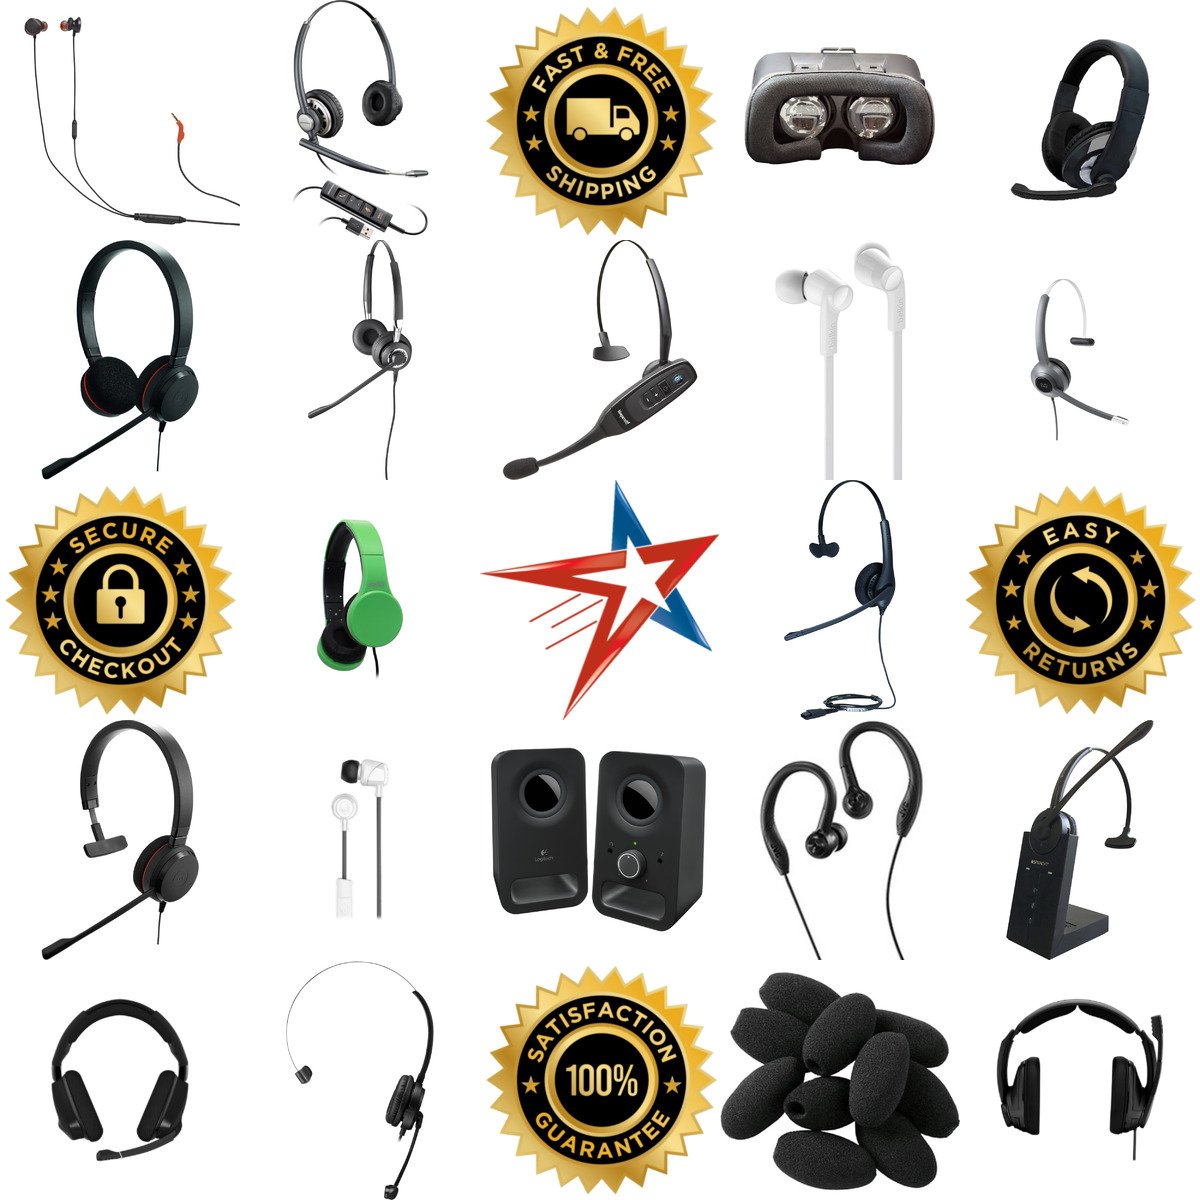 A selection of Computer Speakers and Headsets products on GoVets